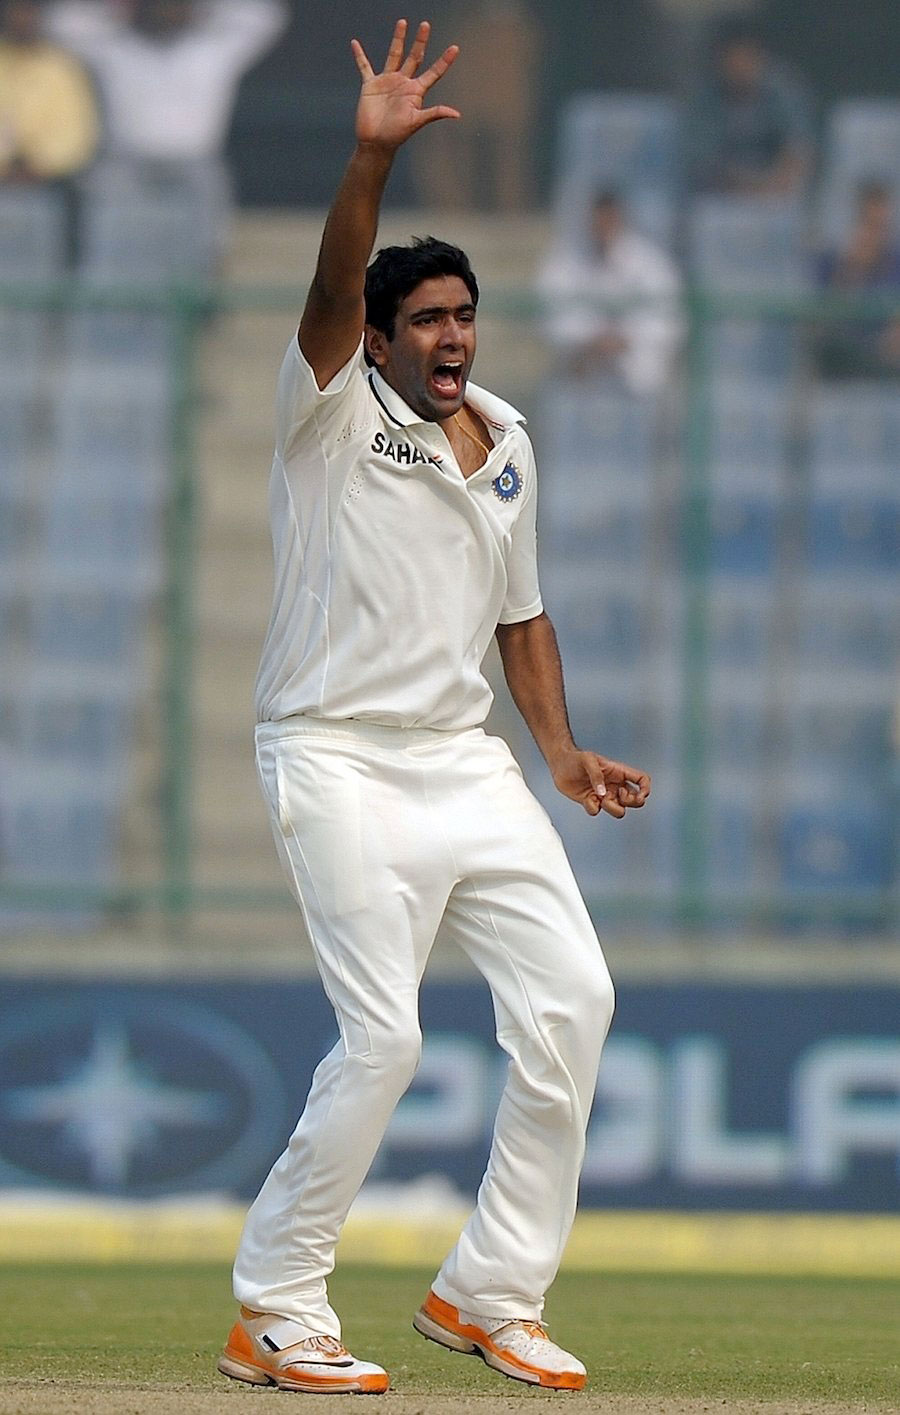 Ashwin should be included in the Playing XI against England | Photo Courtesy: Cricinfo